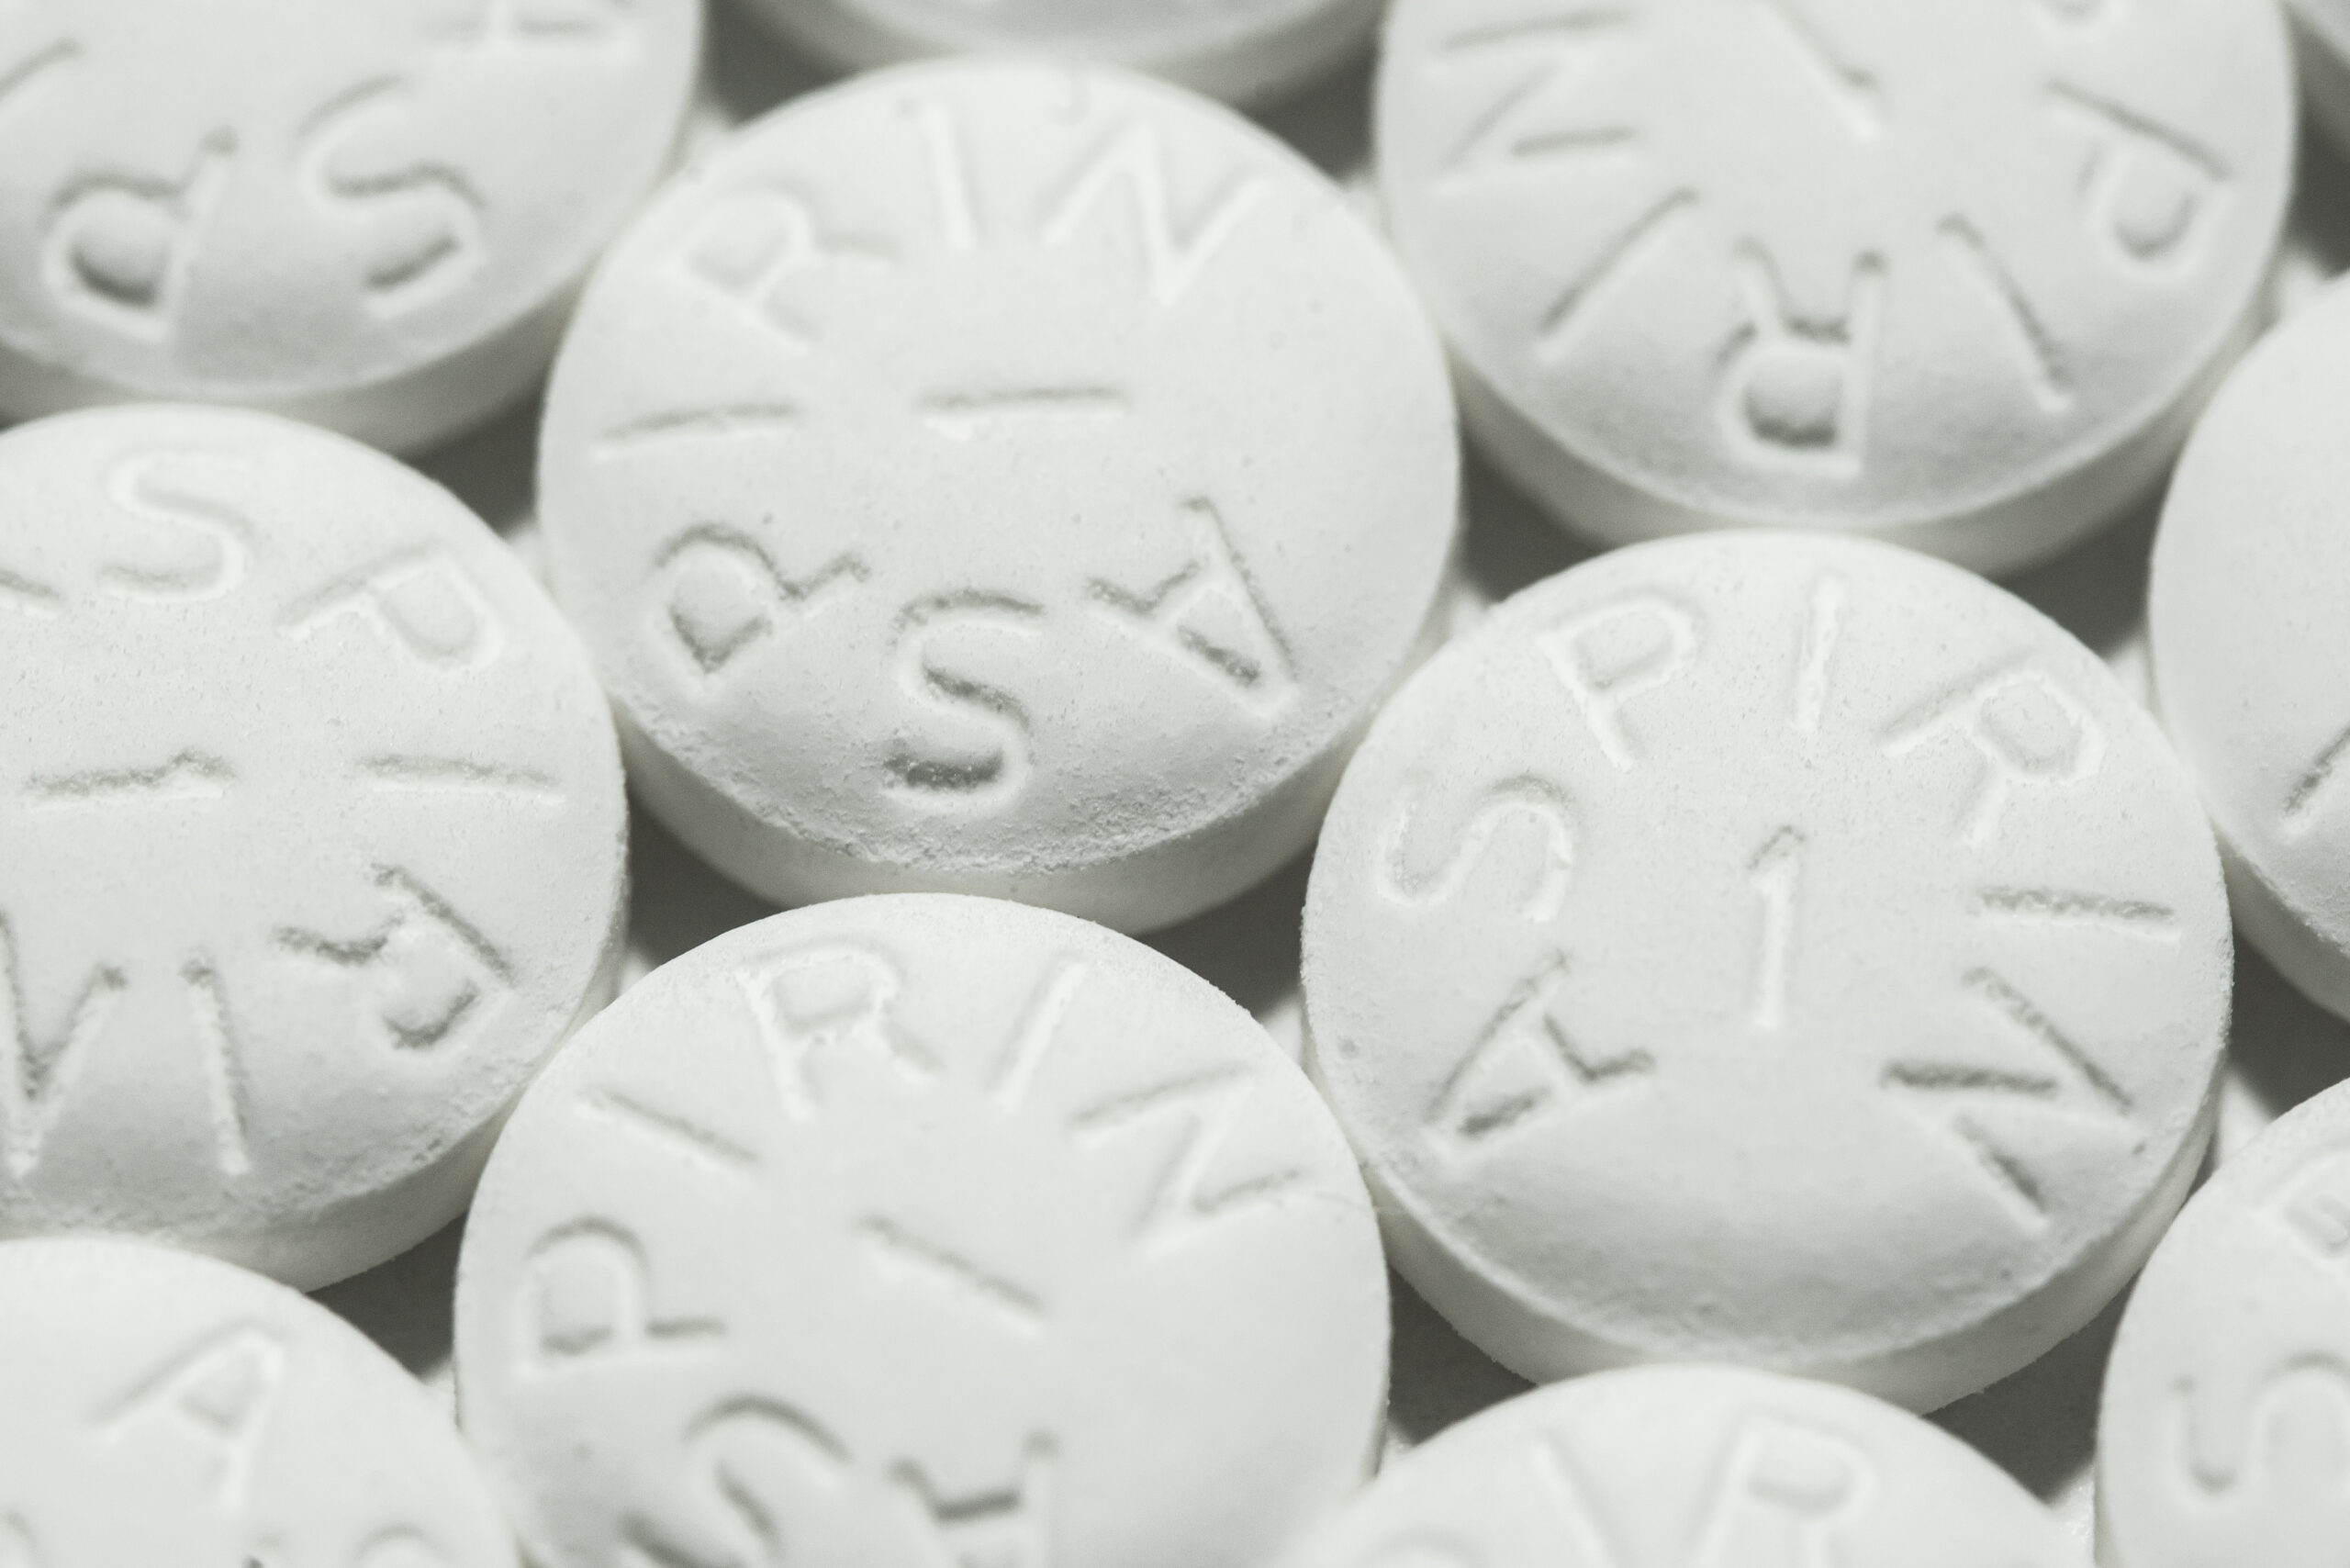 Aspirin has long been prescribed to prevent heart attacks. Now experts say it shouldn’t.